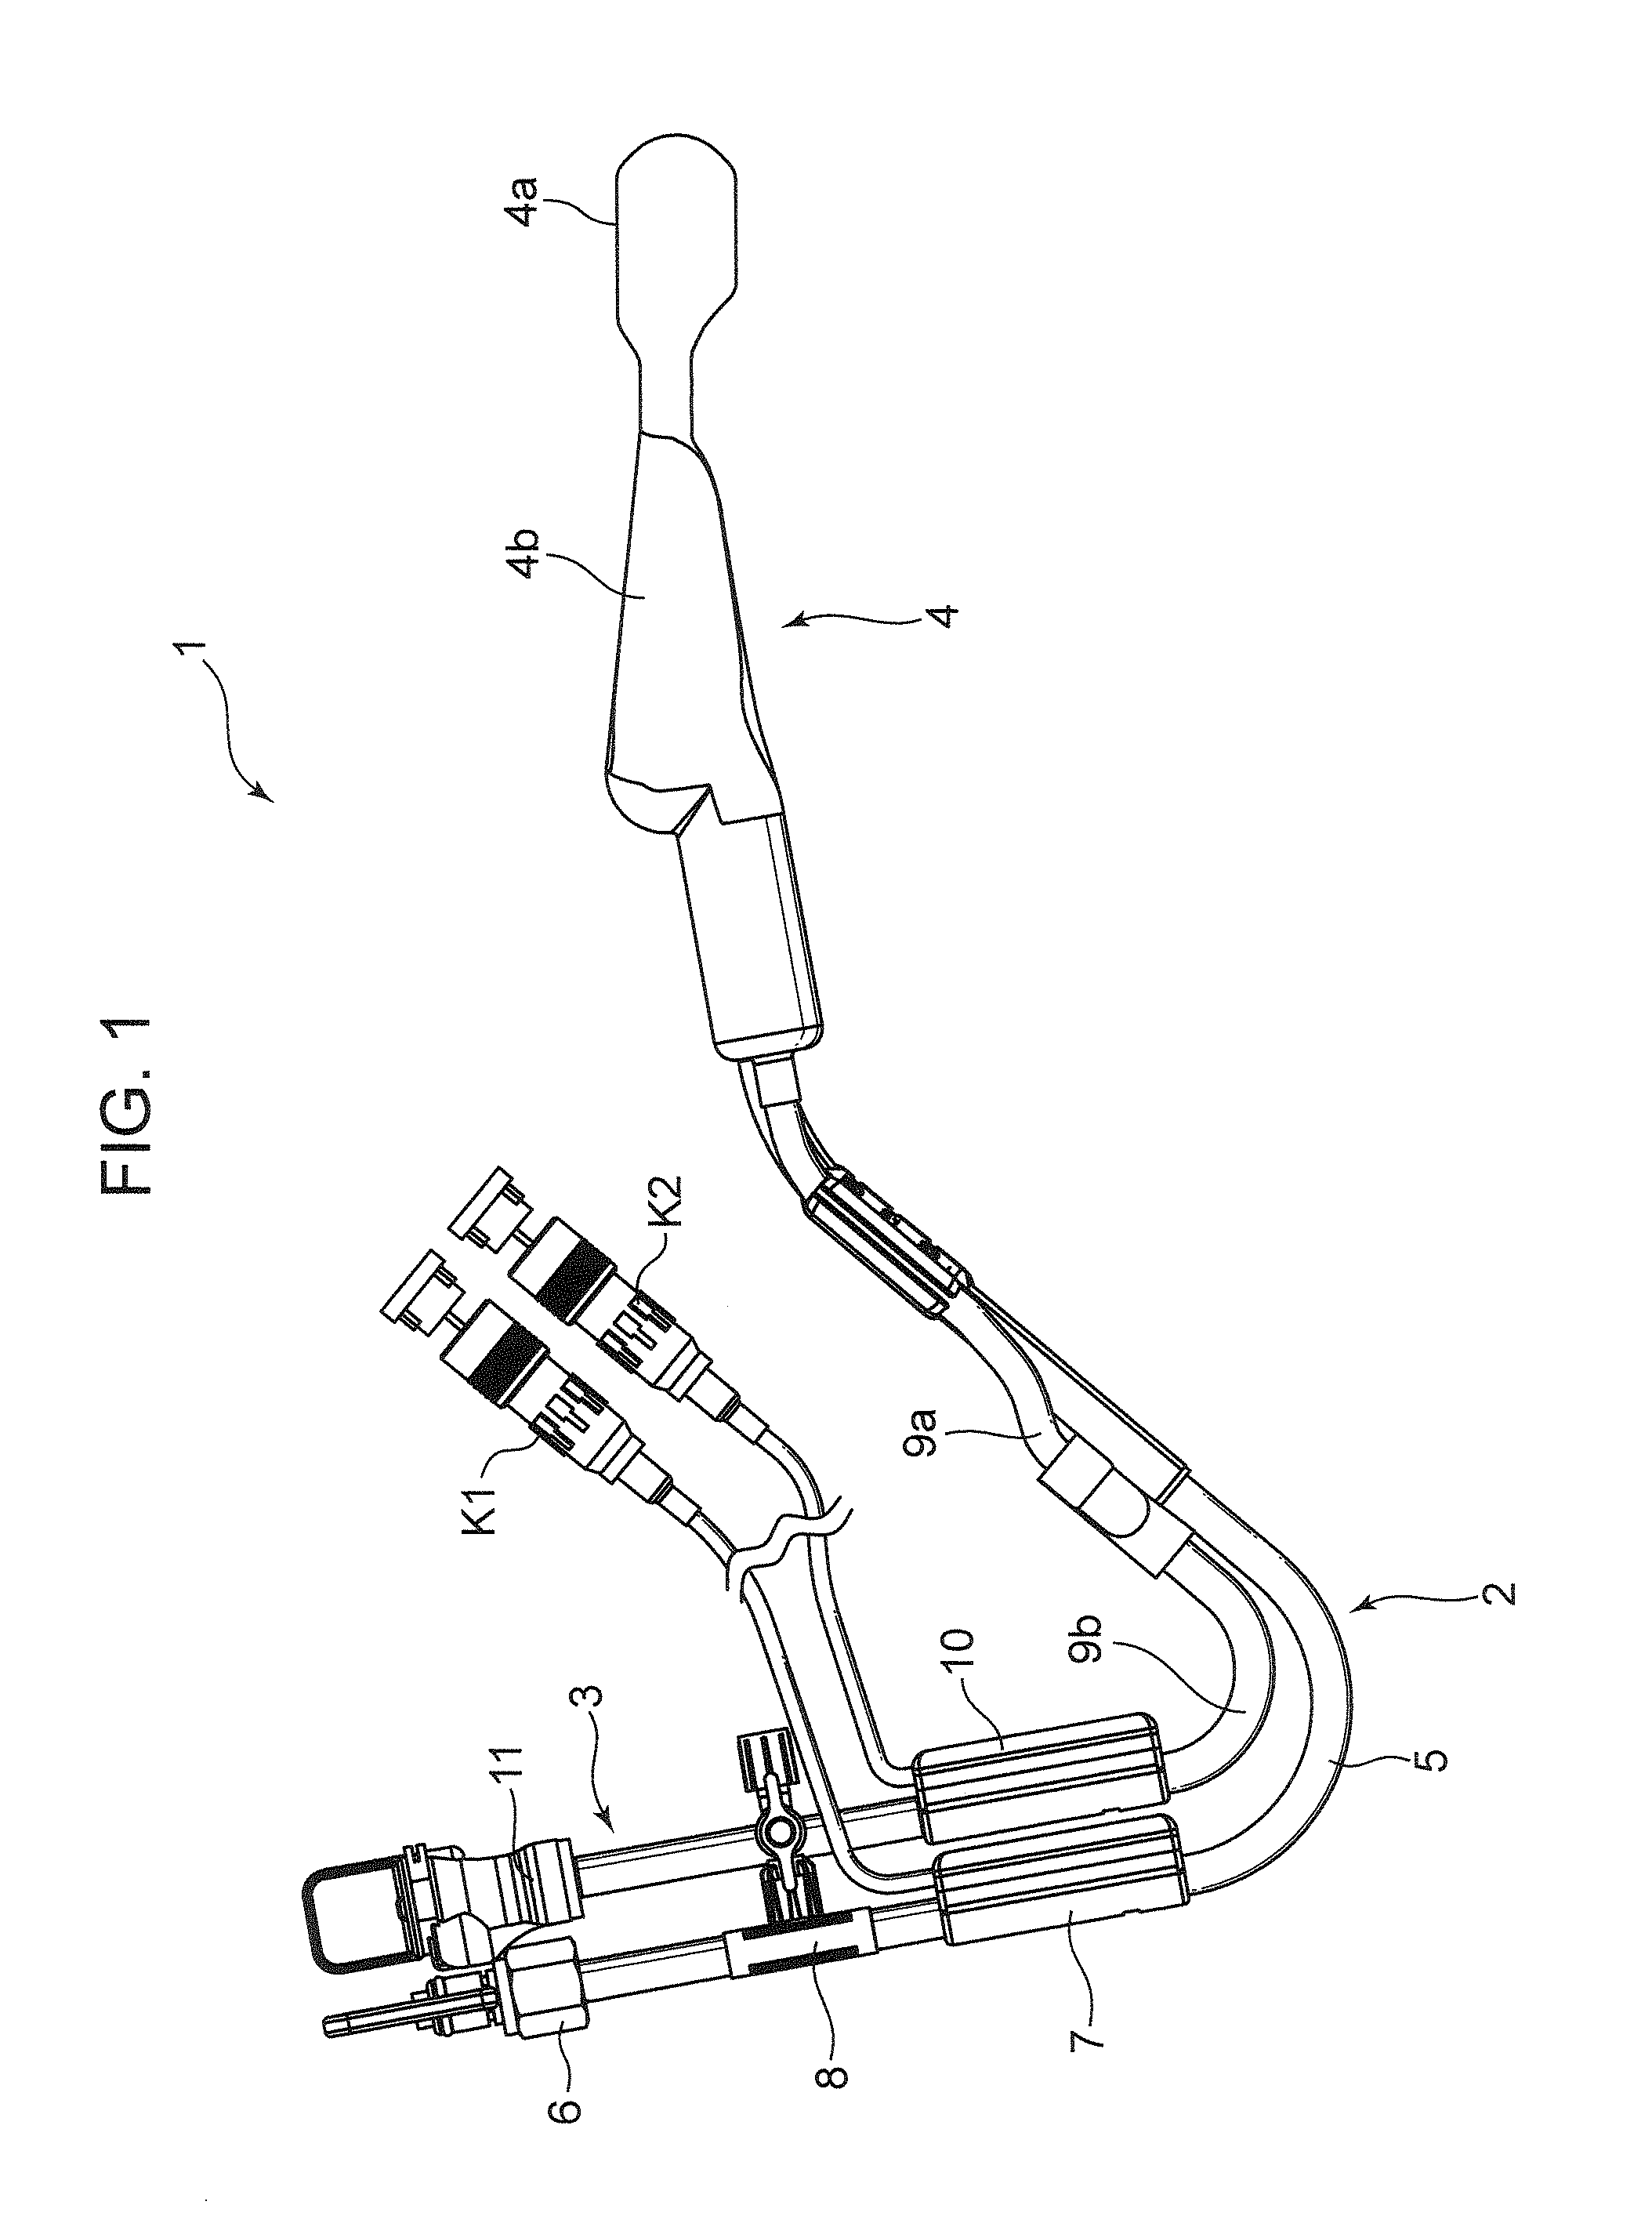 Brain cooling apparatus and brain cooling device suitable thereto